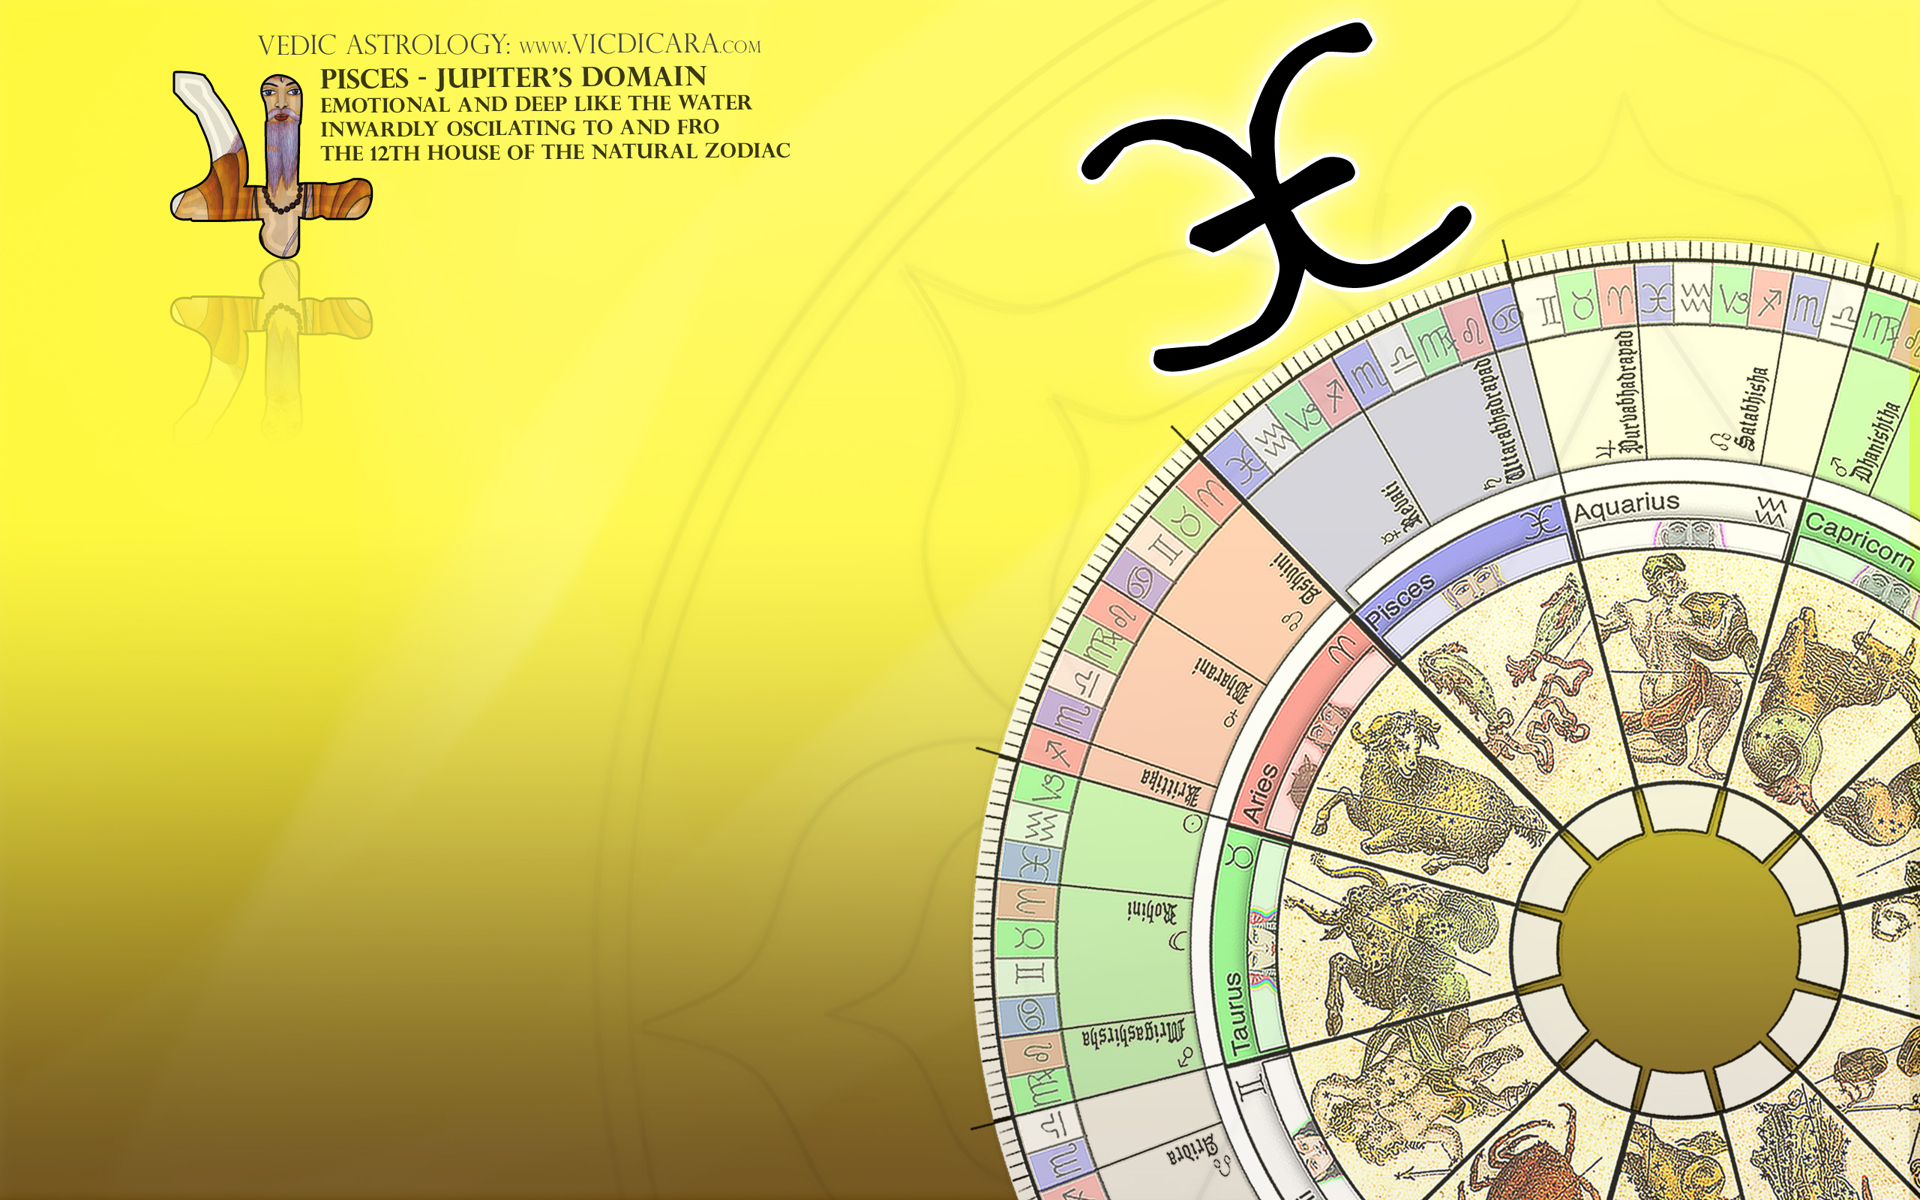 Signs of the zodiac on a yellow background wallpapers and images